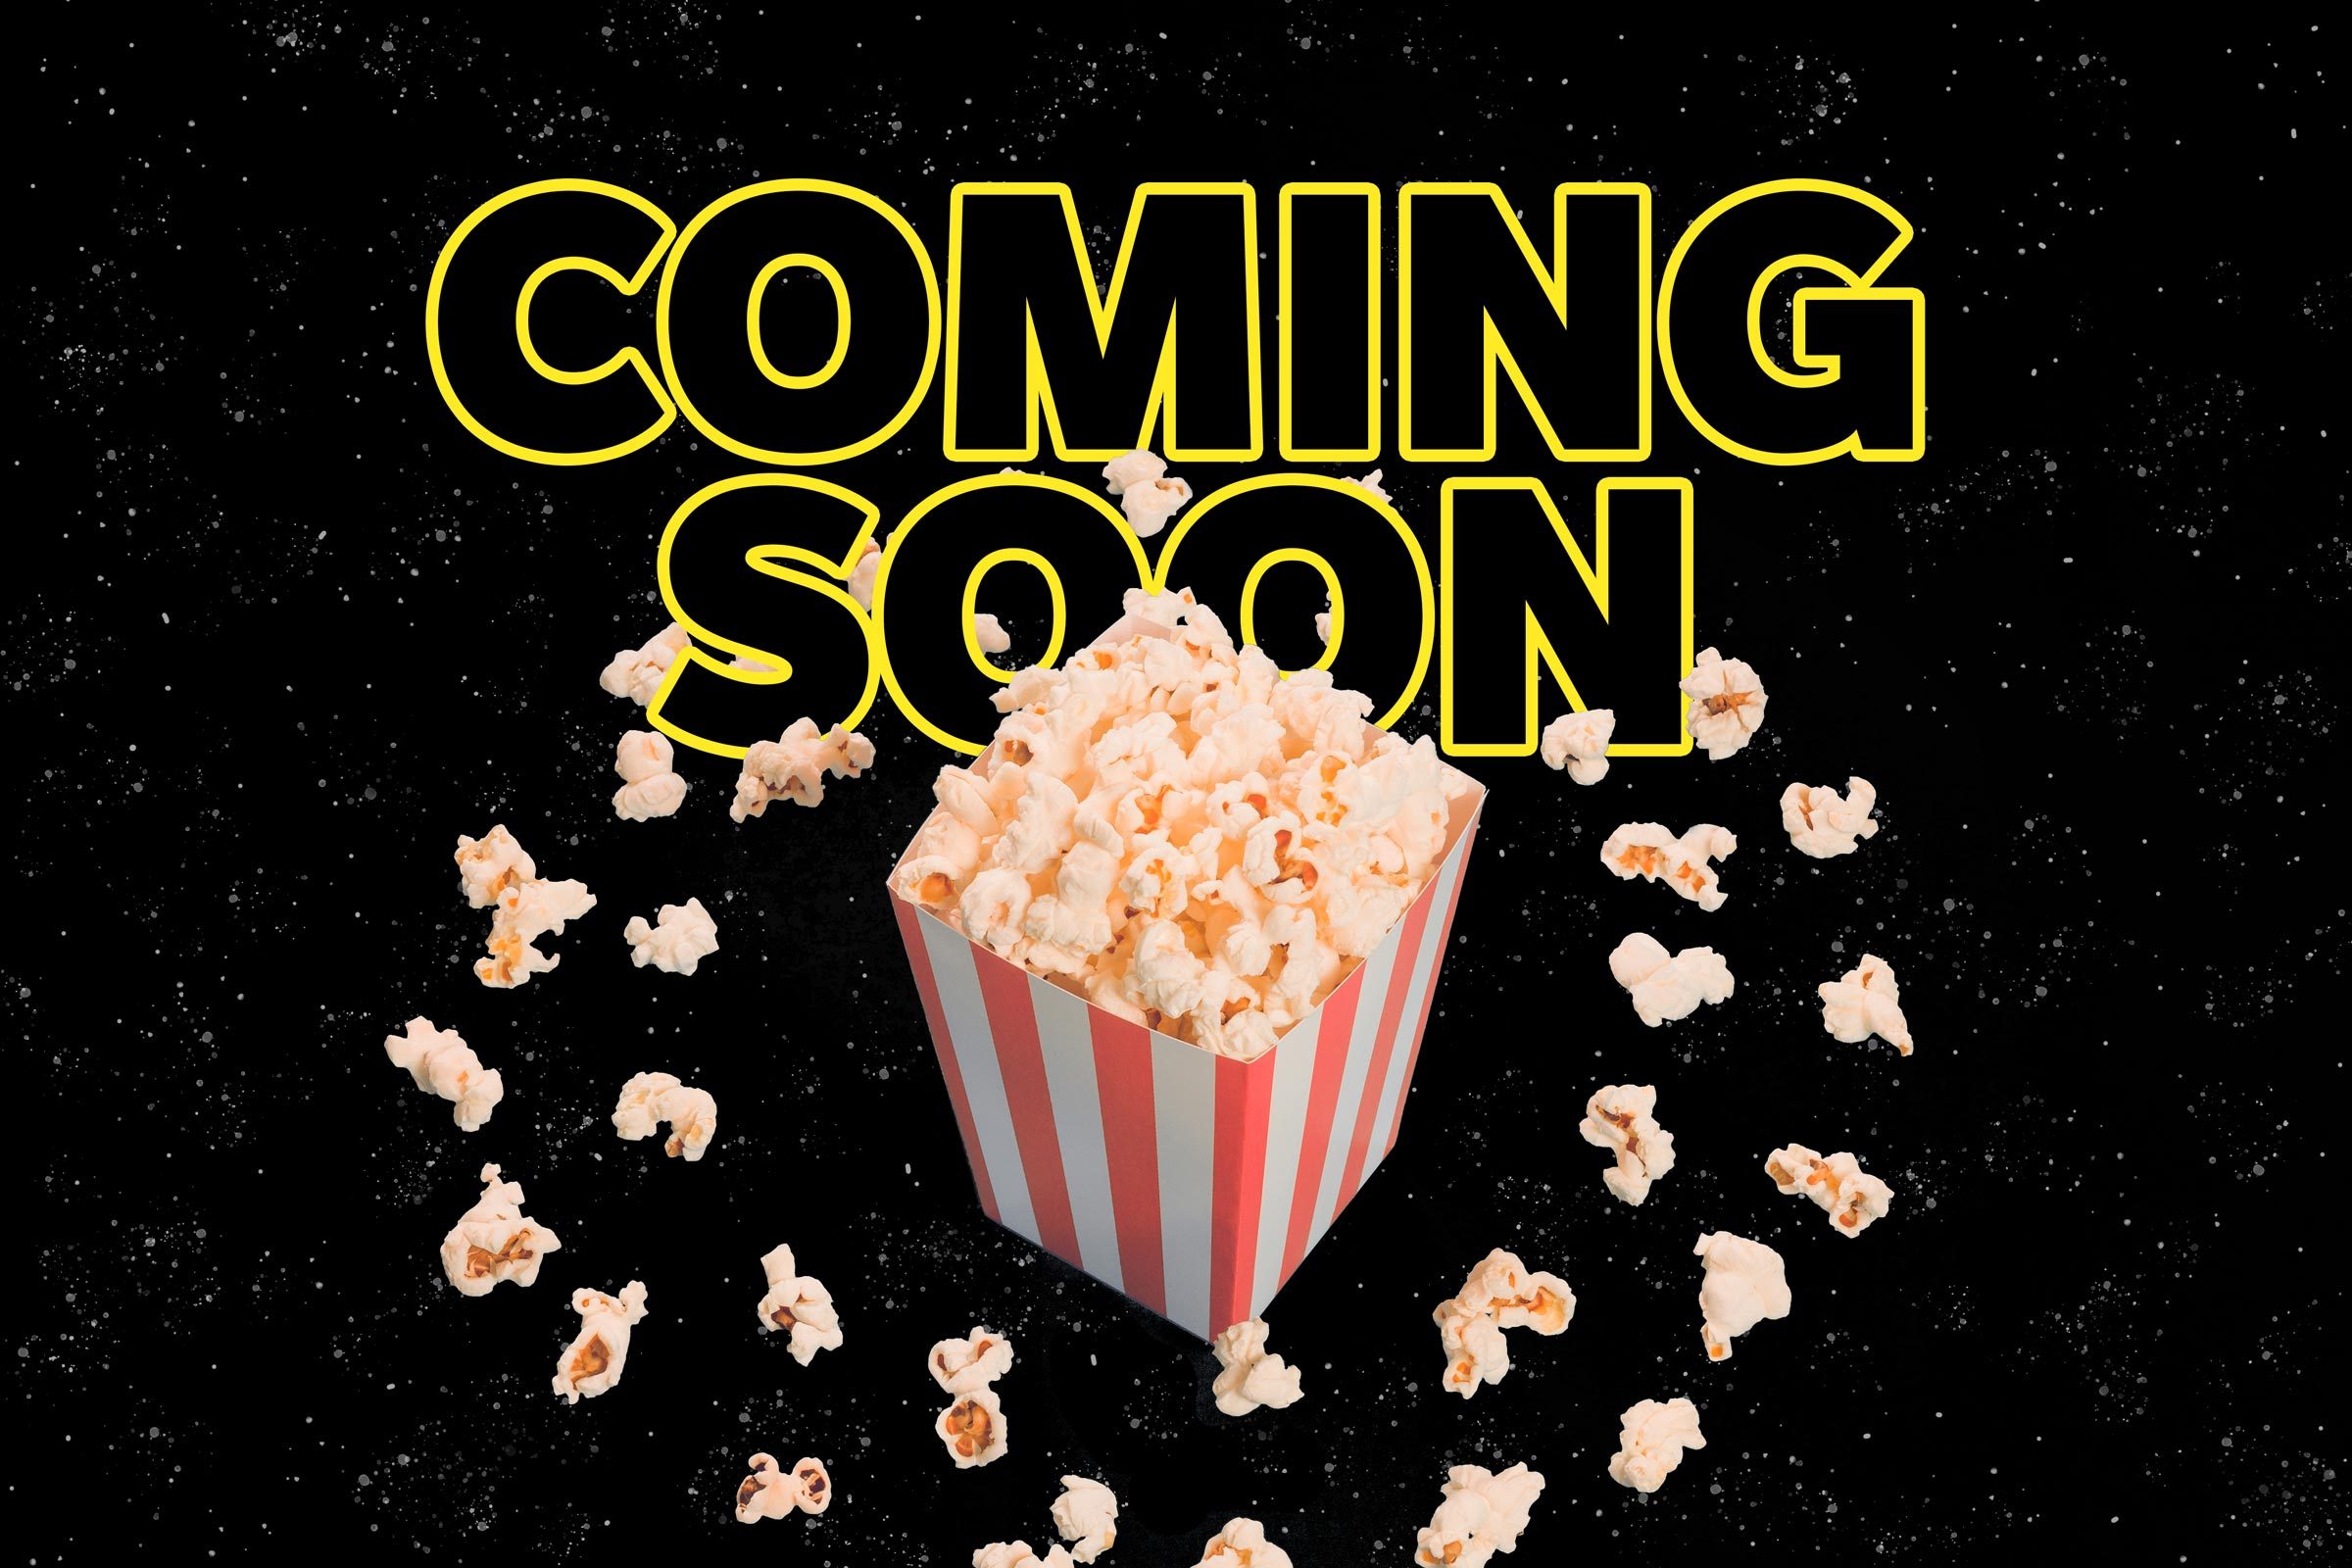 "Coming Soon" in a Star Wars-like type treatment with a carton of popcorn and popcorn pieces floating in a circle like an asteroid ring